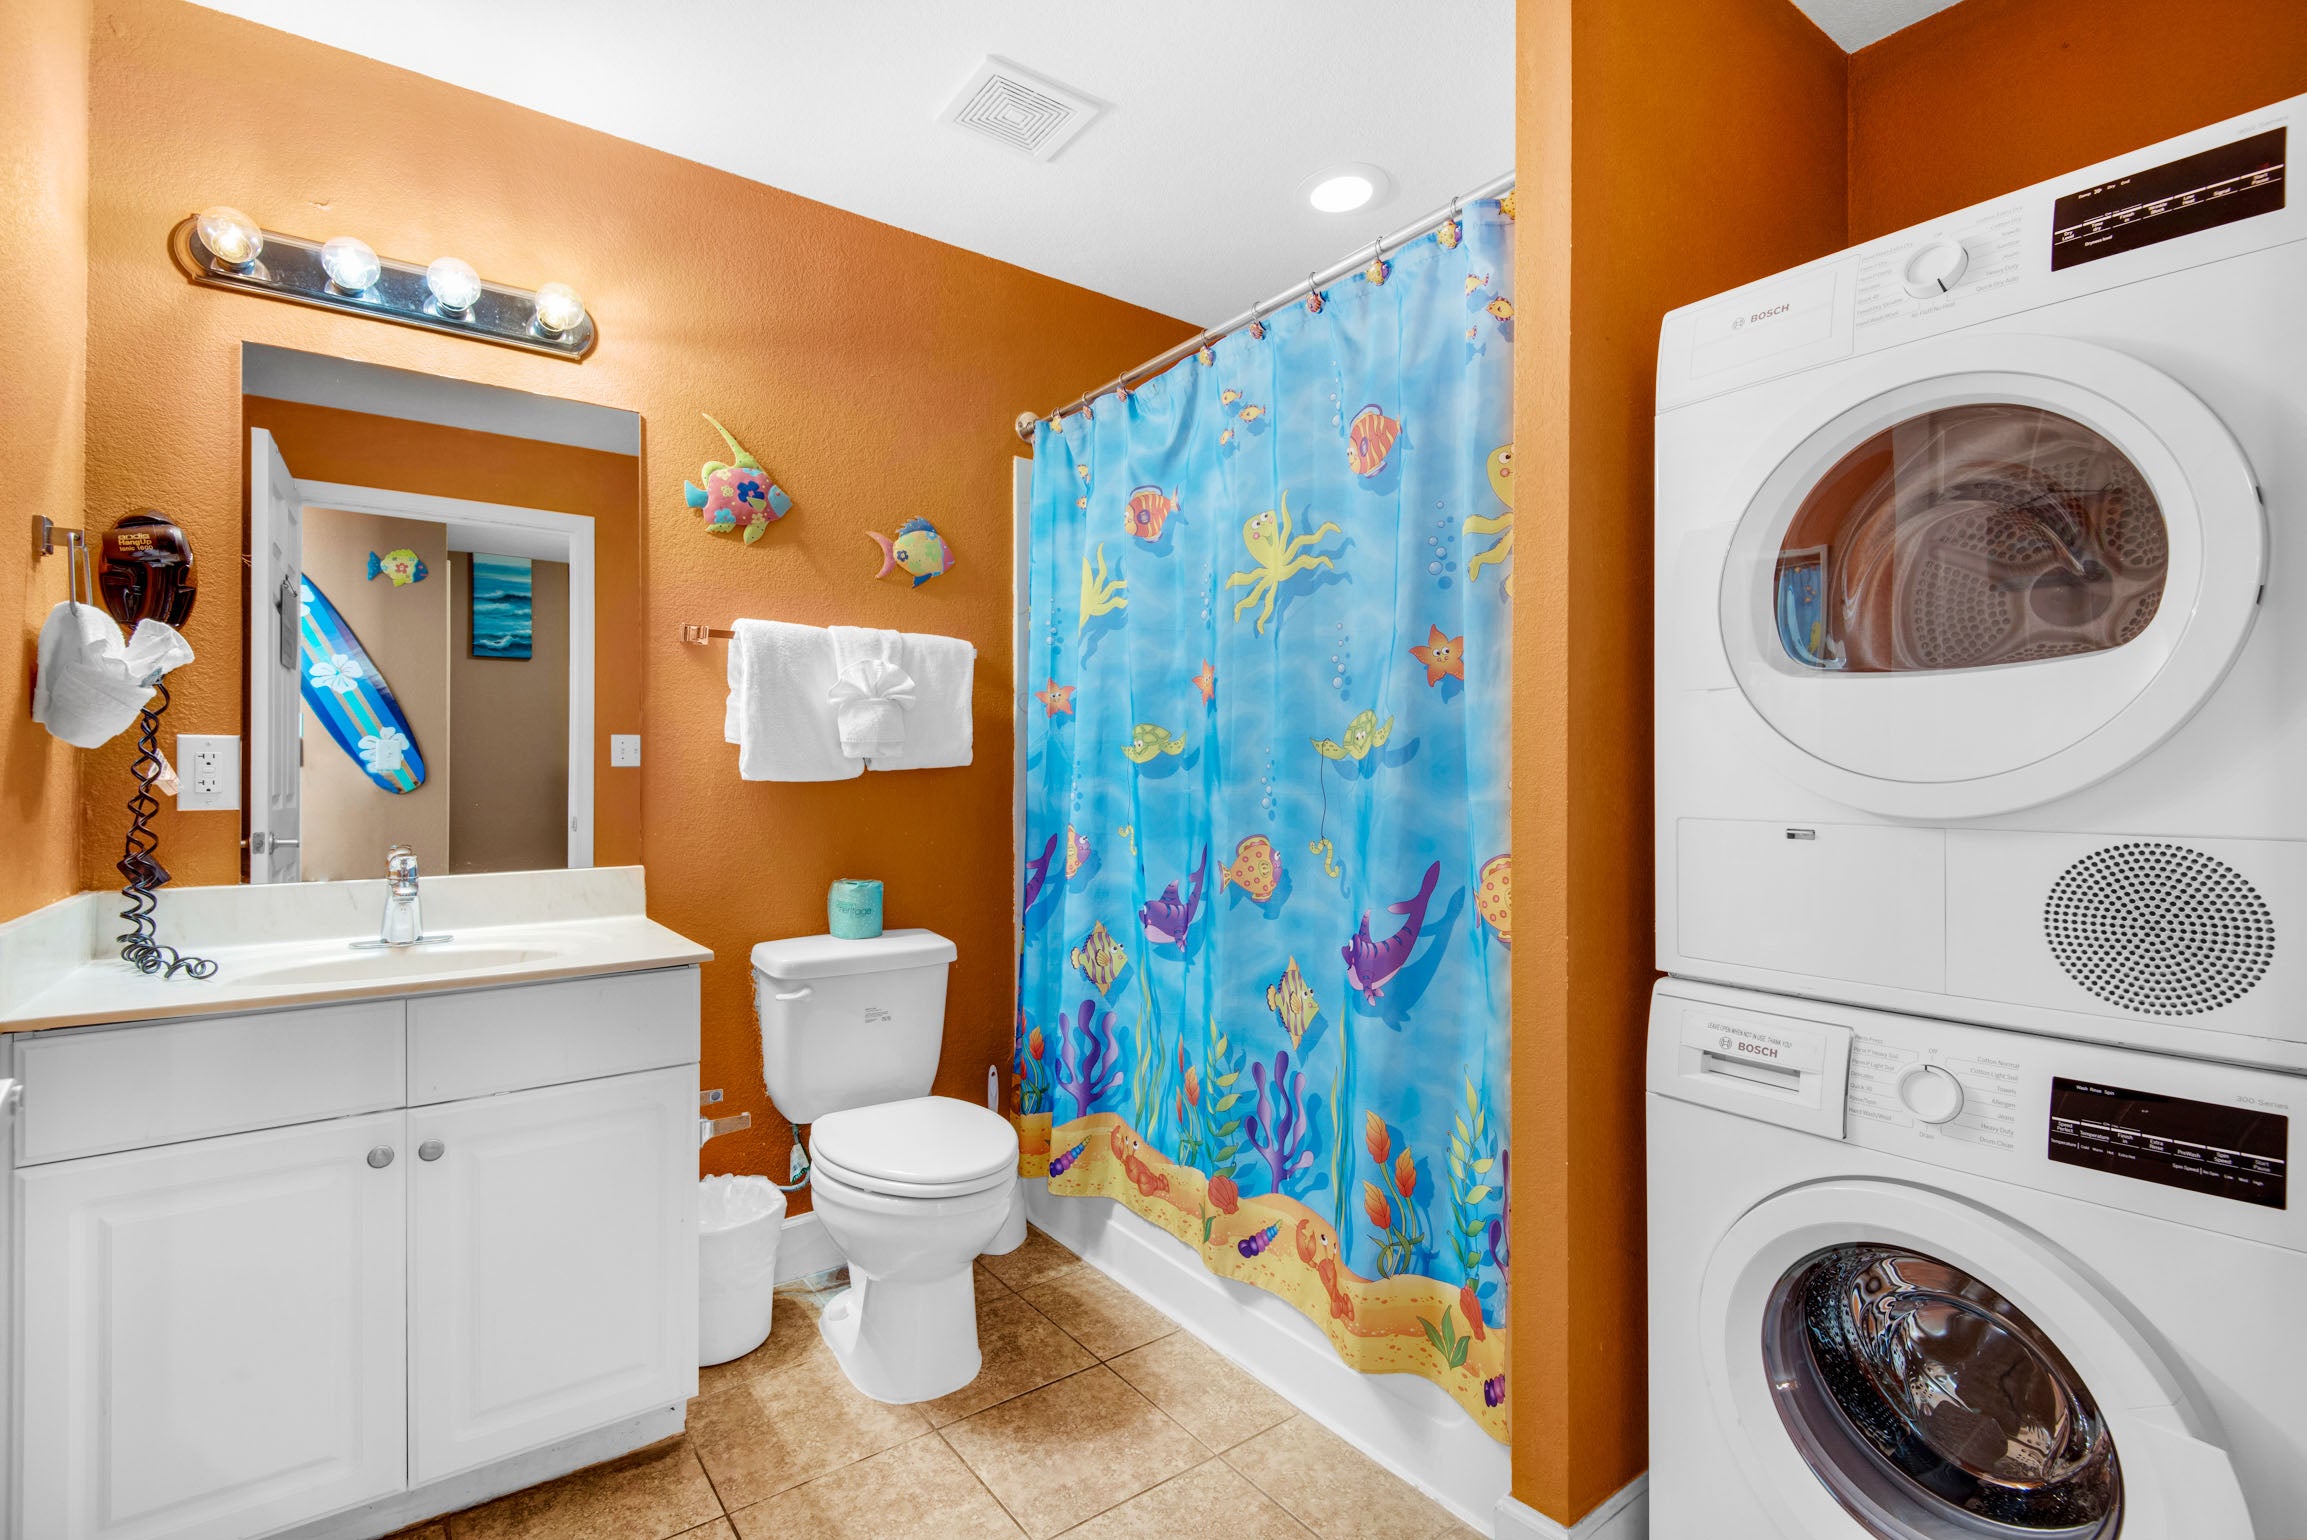 Guest bathroom with washer and dryer